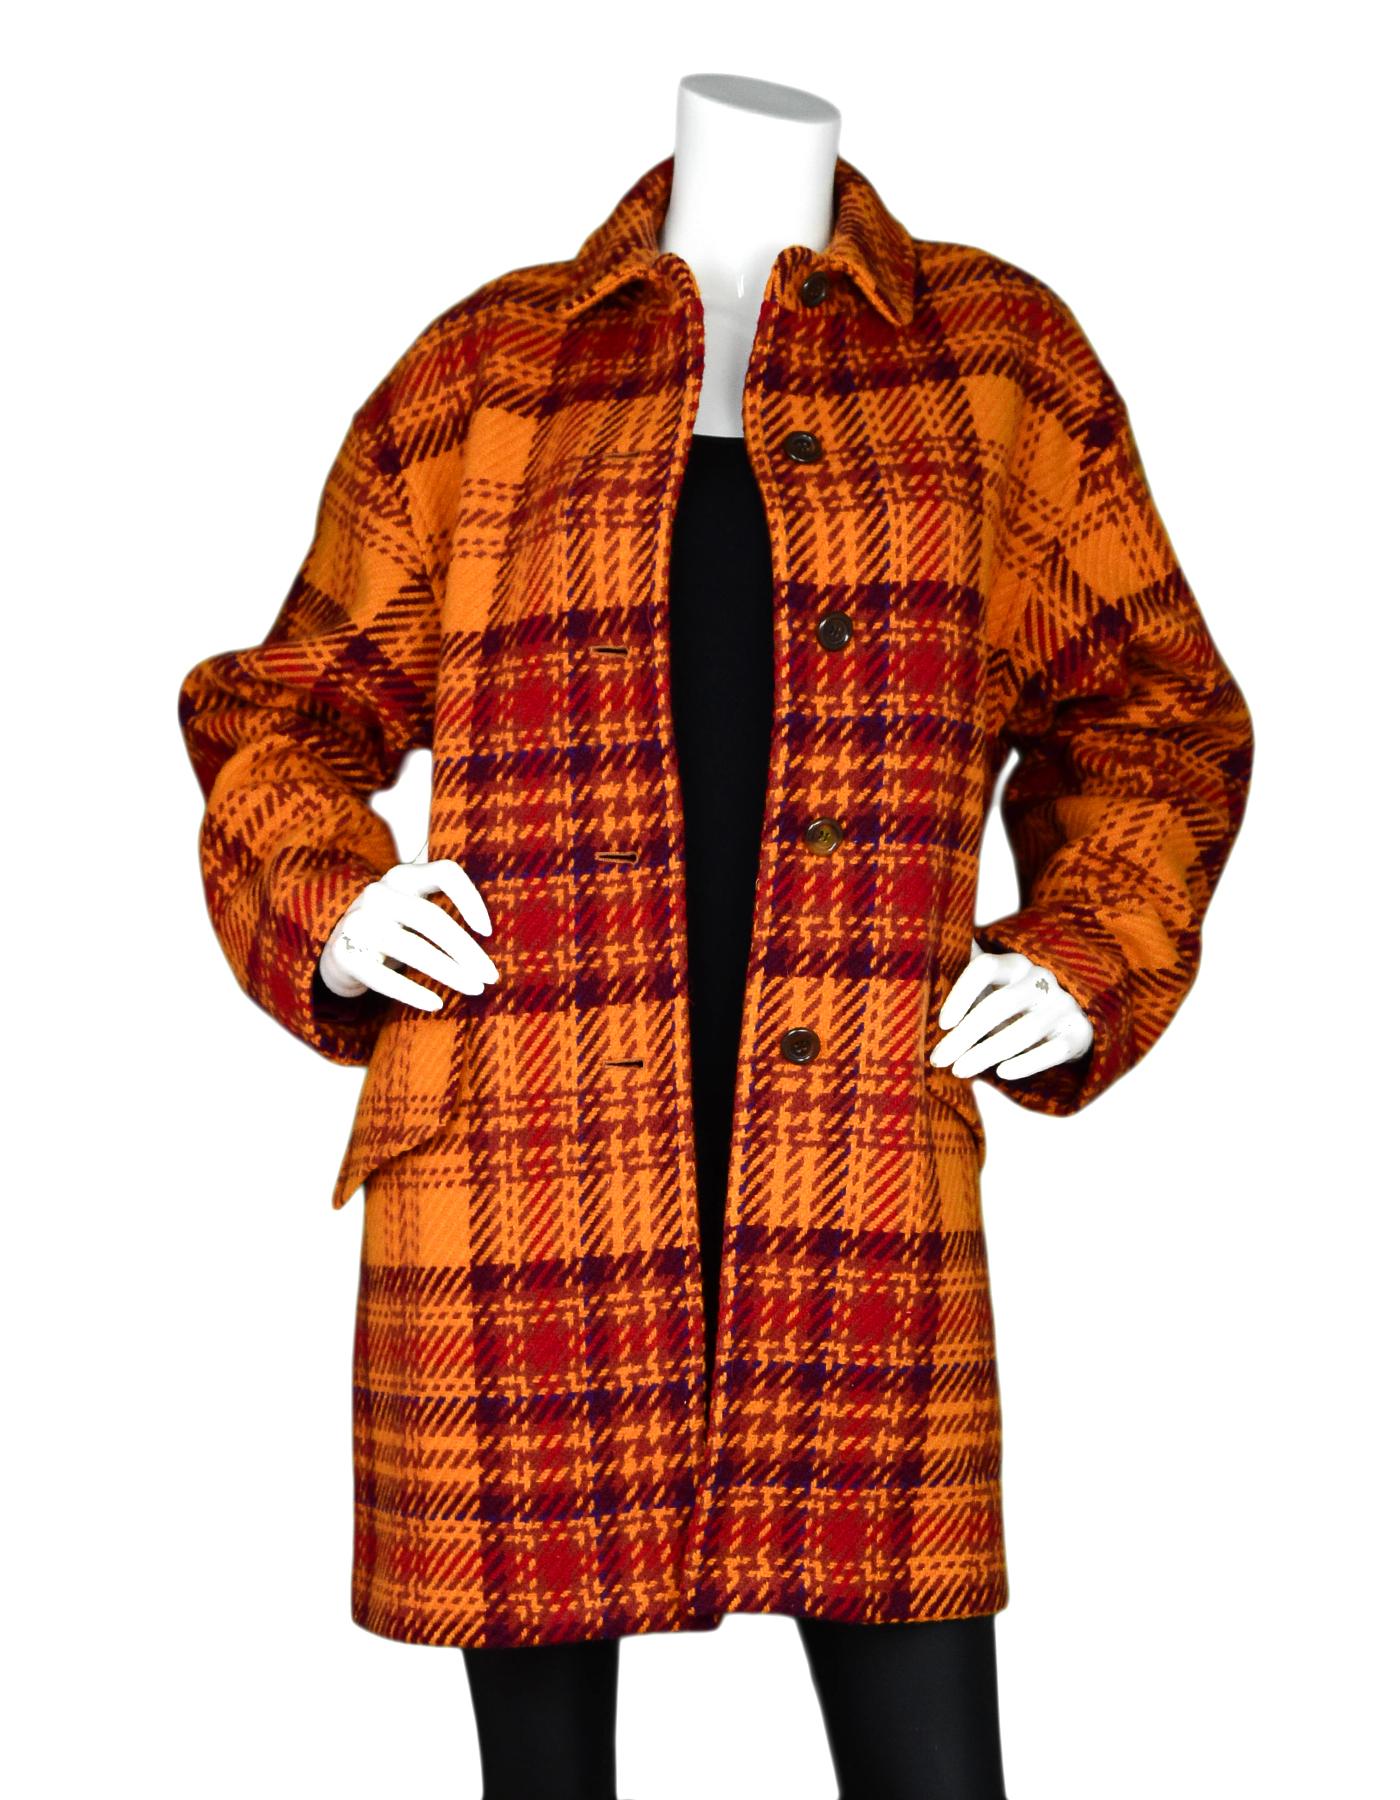 Burberry Orange/Red Wool Tartan Plaid Coat Sz XL

Made In:  U.S.A
Color: Orange, red
Materials: 100% wool
Lining: Burgundy satin
Opening/Closure: Button front
Overall Condition: Excellent pre-owned condition  
Measurements: 
Shoulder To Shoulder: